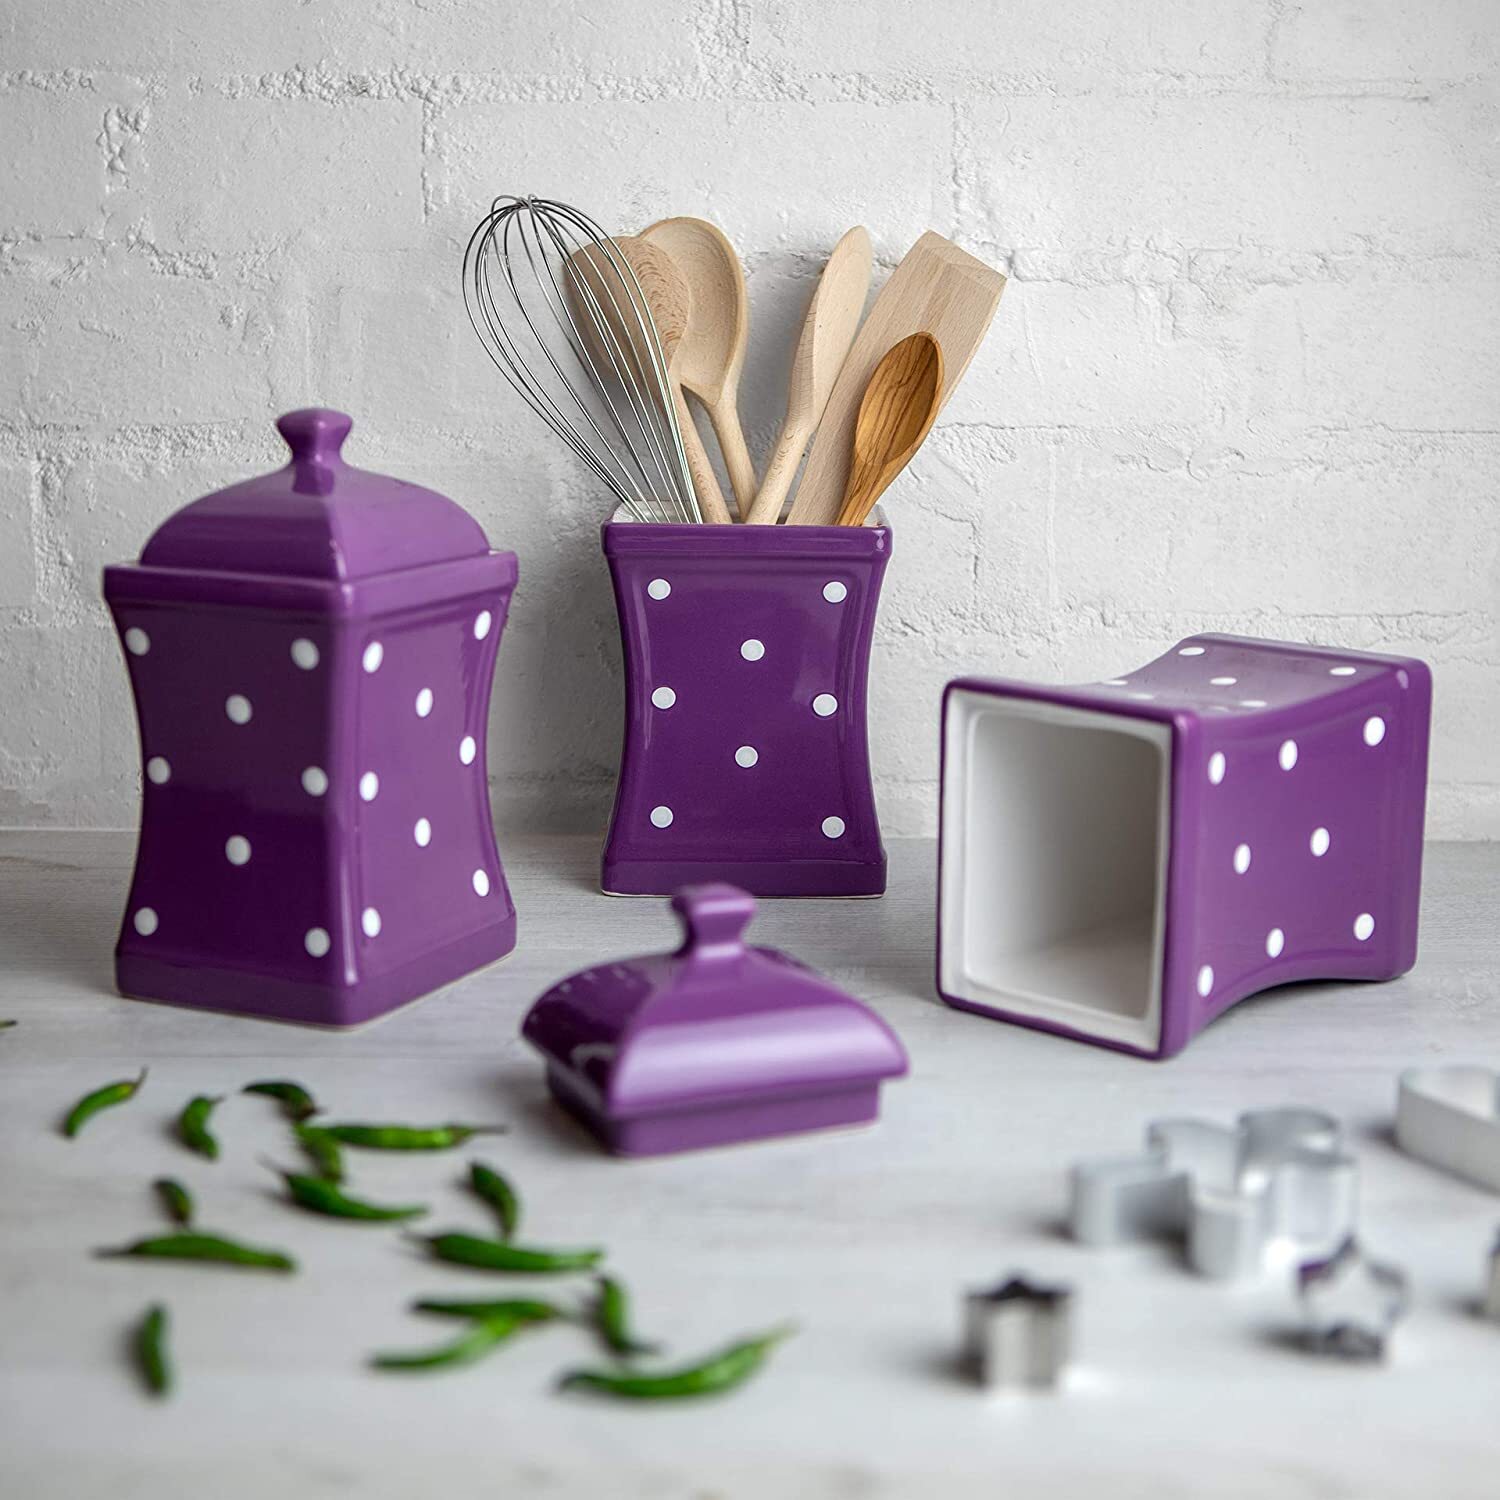 Quirky Kitchen Canisters With Crazy Patterns